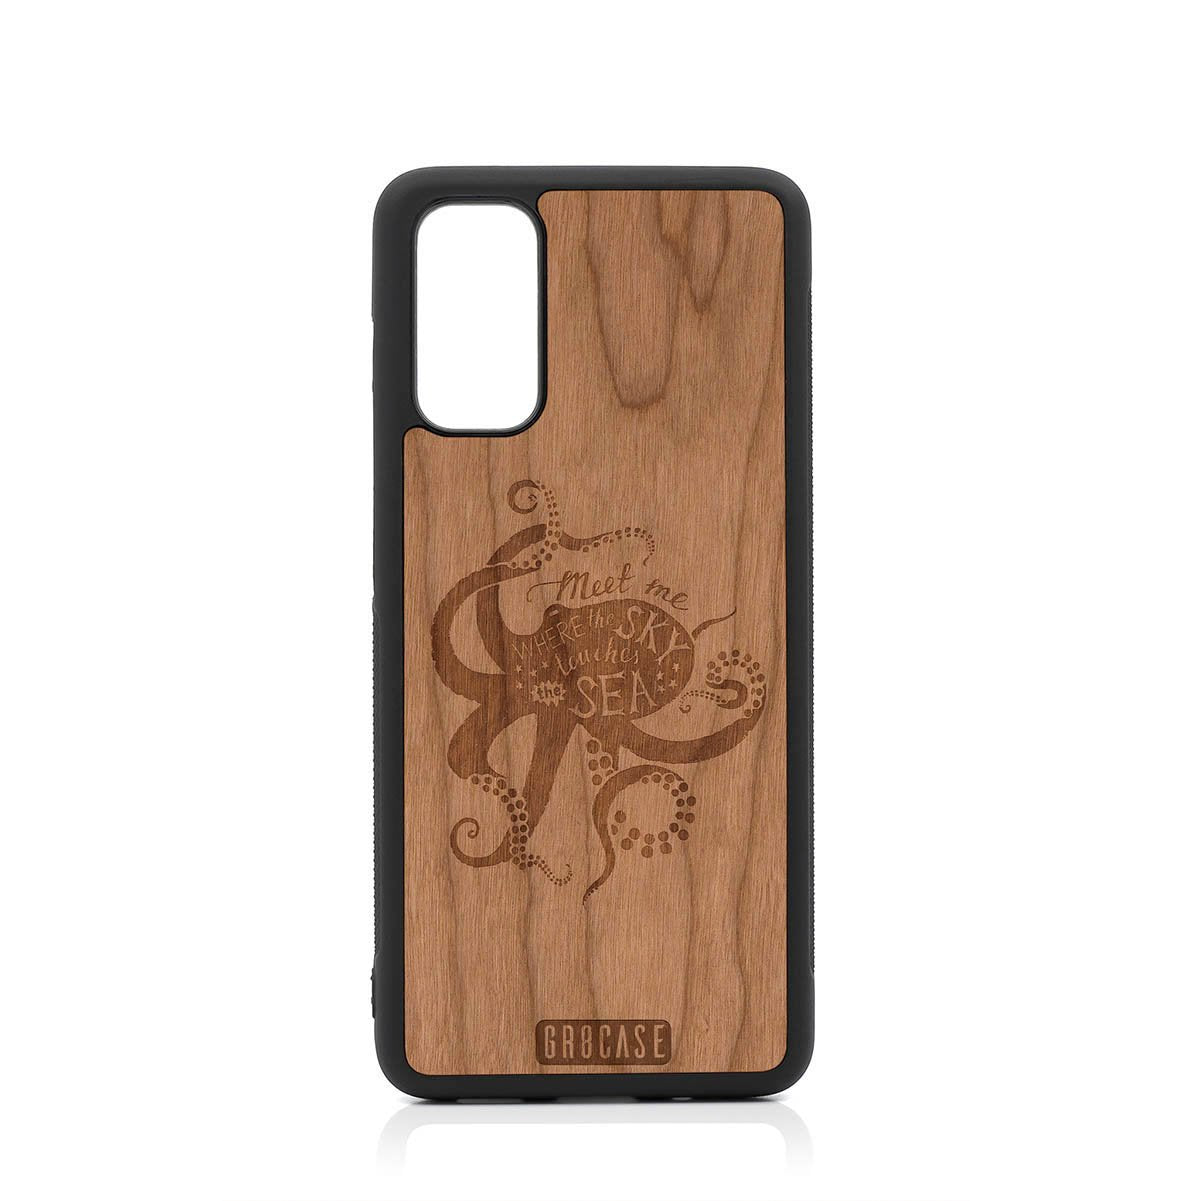 Meet Me Where The Sky Touches The Sea (Octopus) Design Wood Case For Samsung Galaxy S20 FE 5G